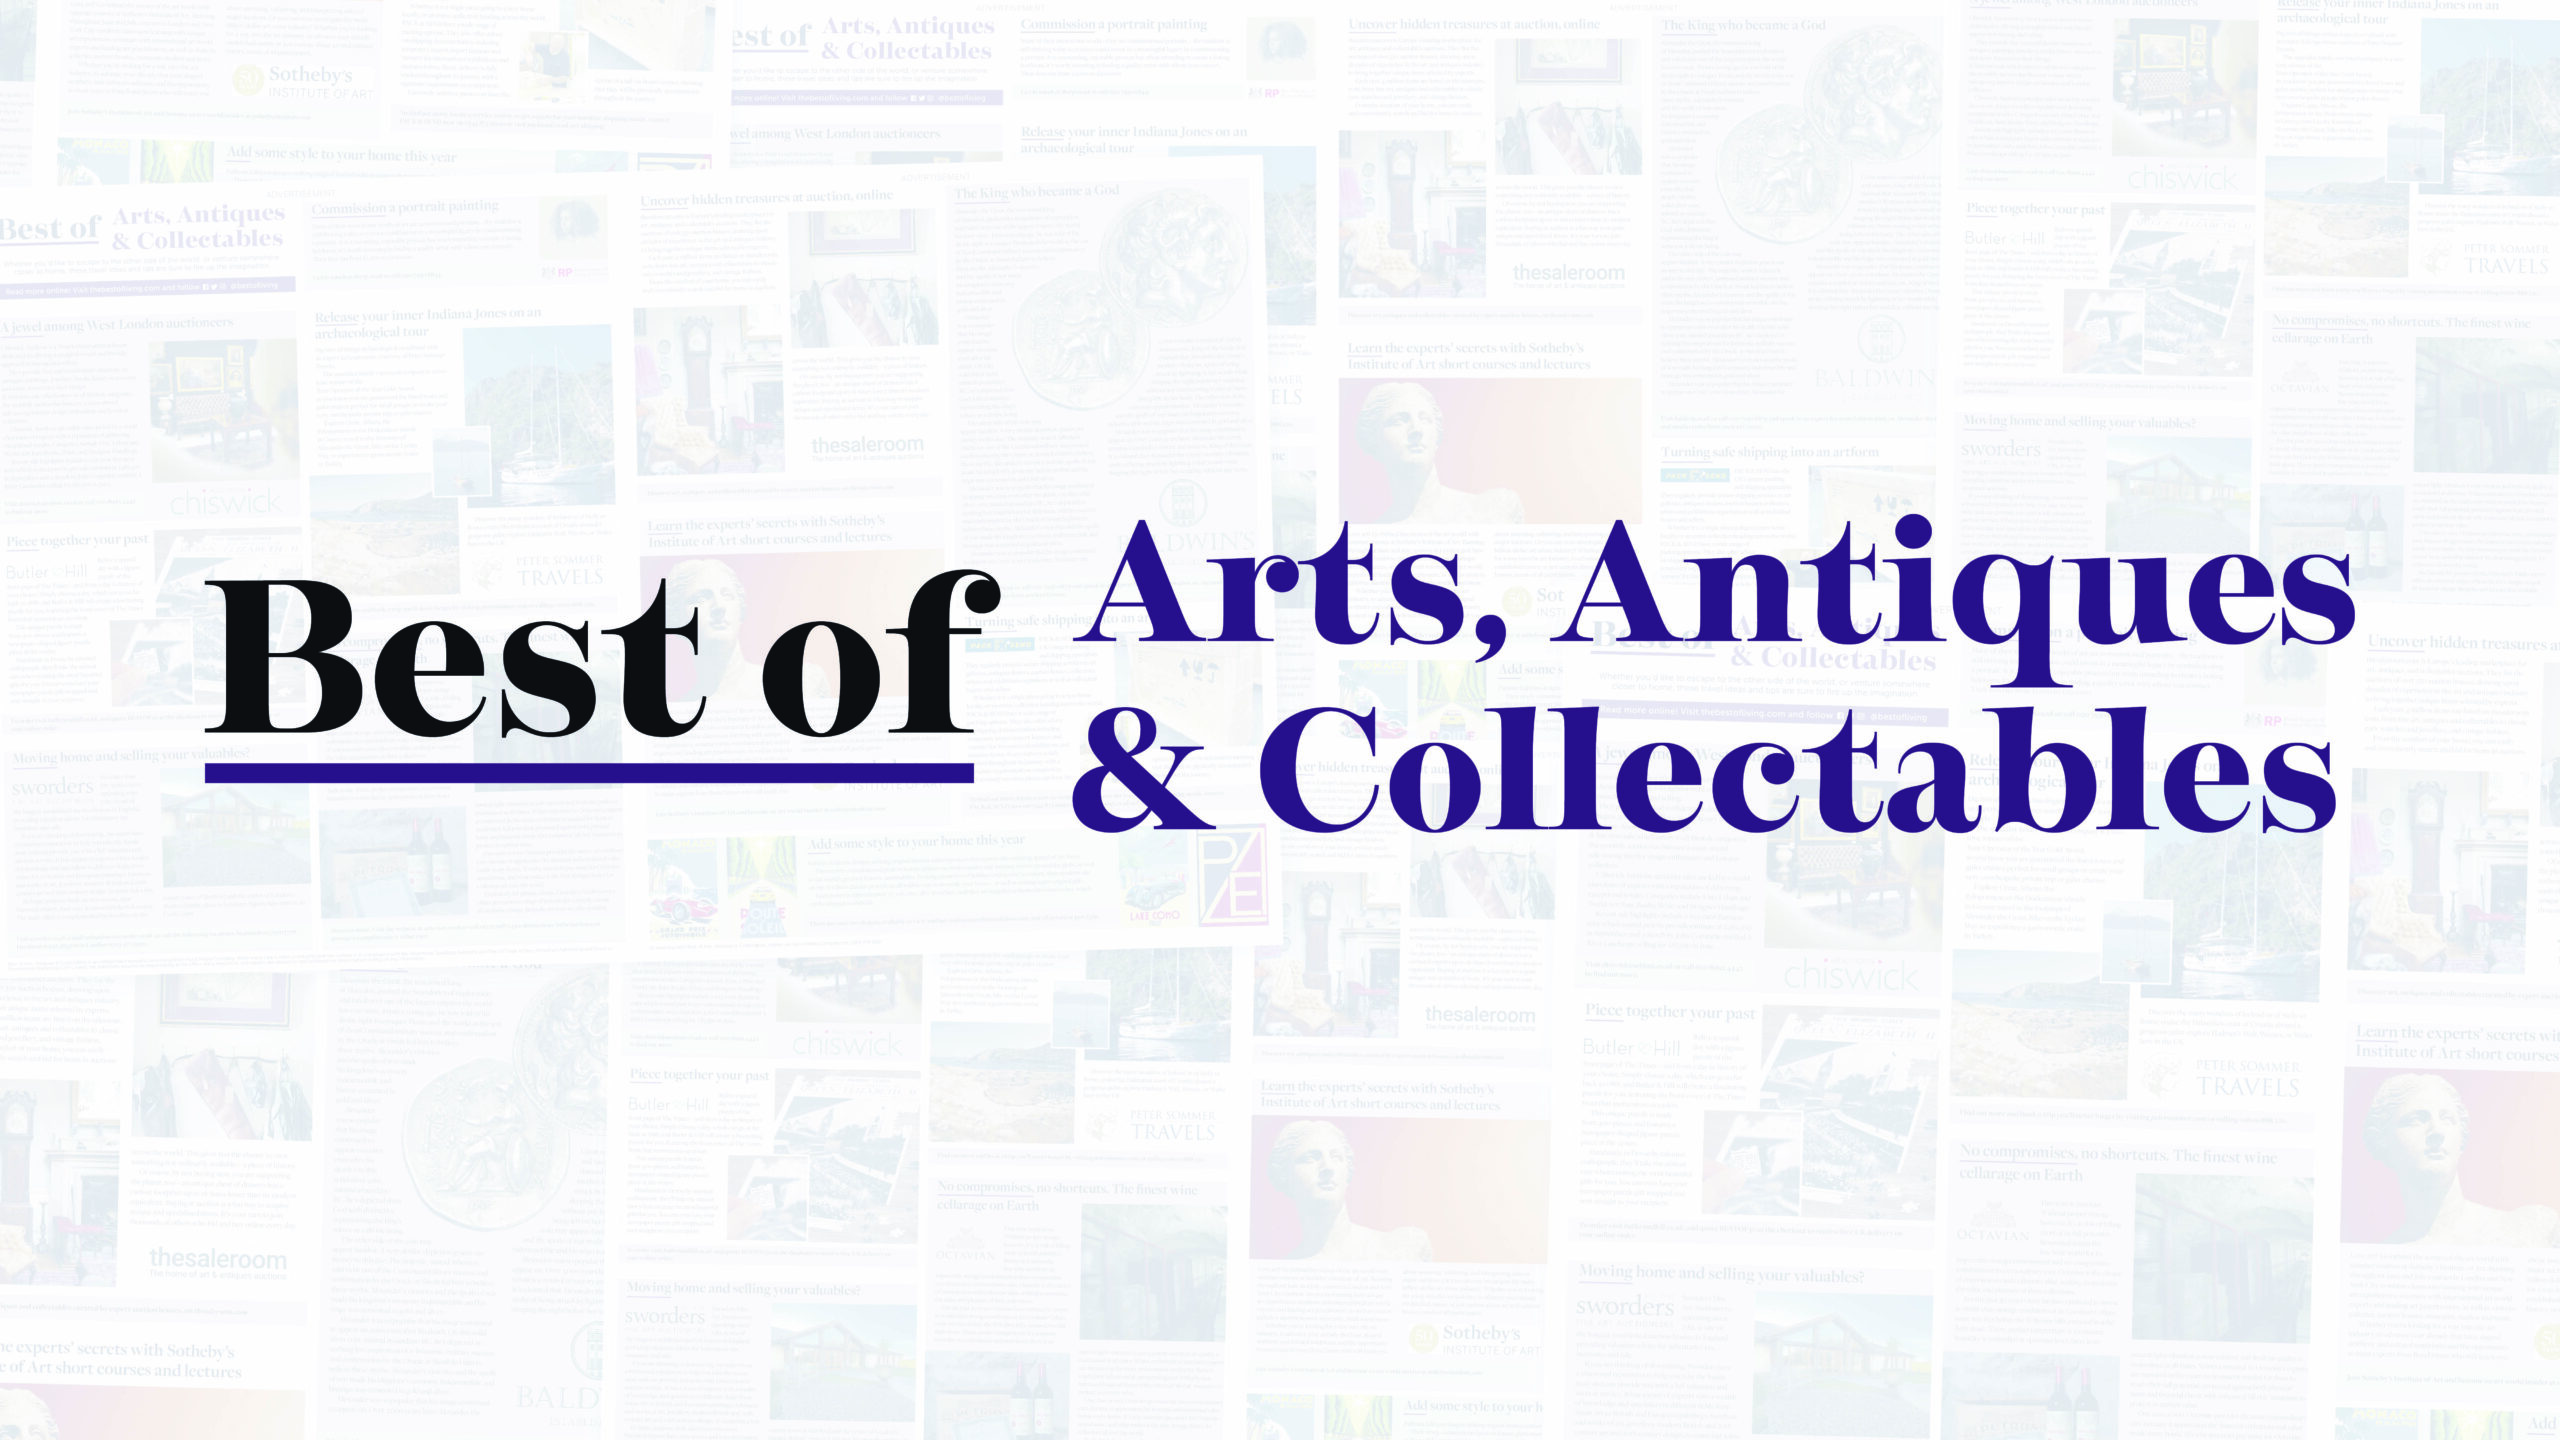 Best of Arts, Antiques & Collectables